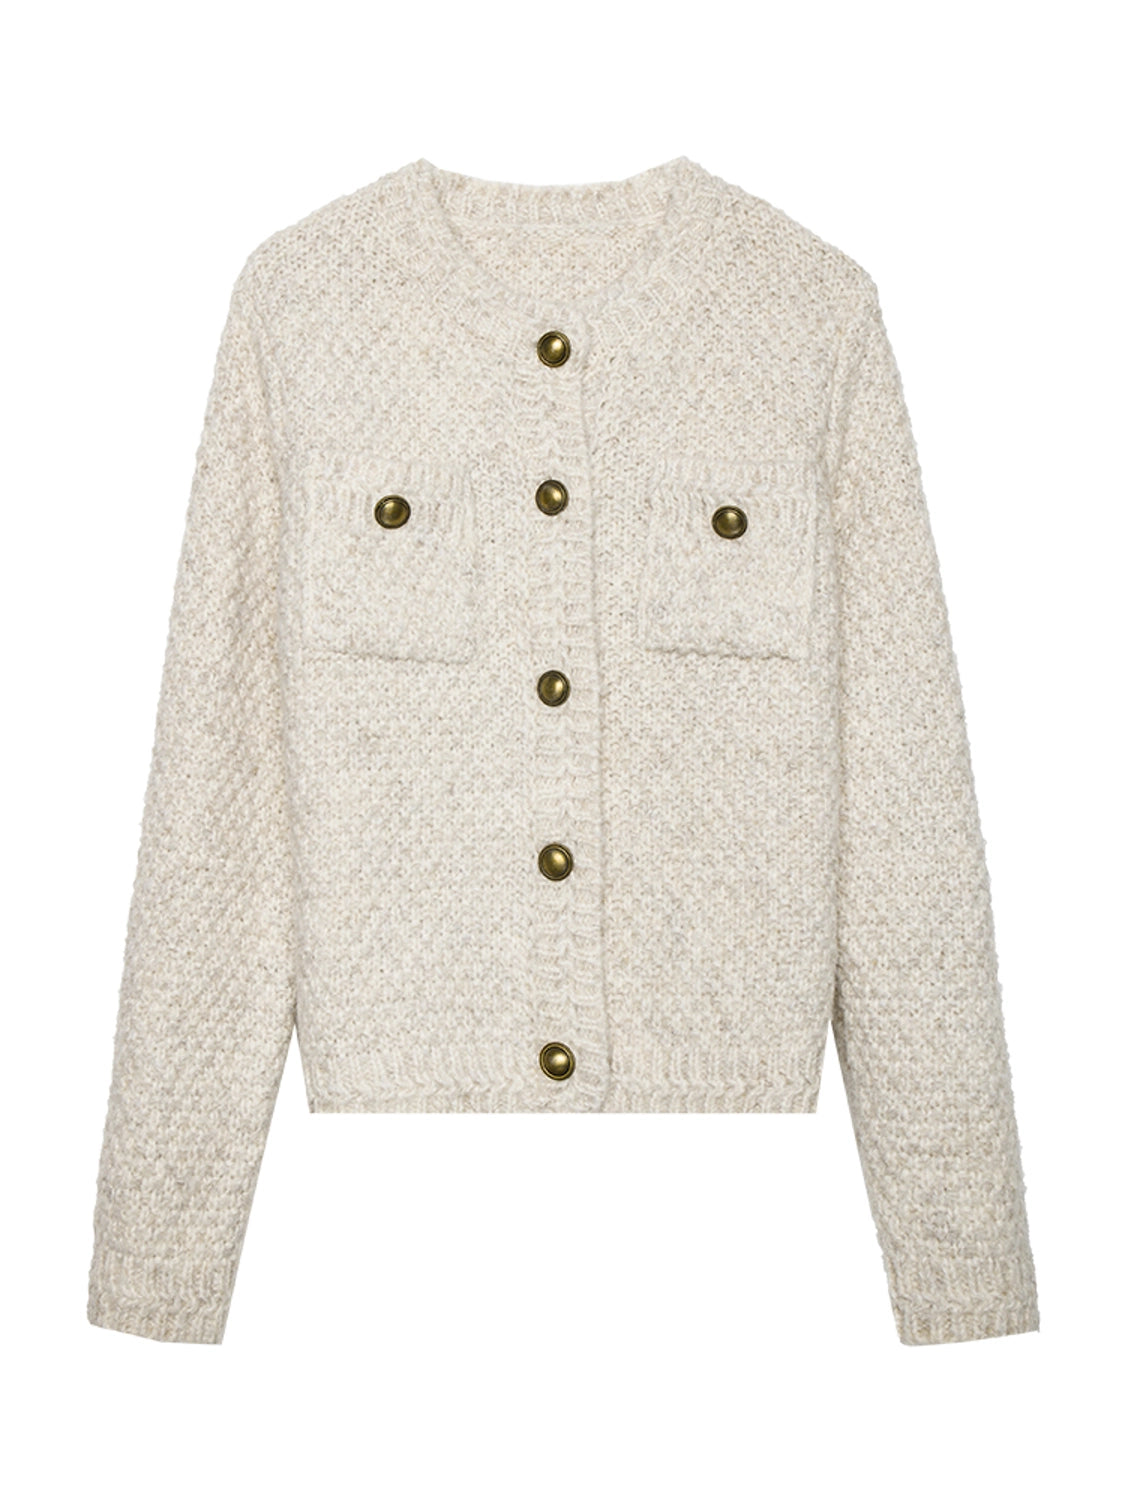 Women's Textured Button-Up Cardigan with Front Pockets